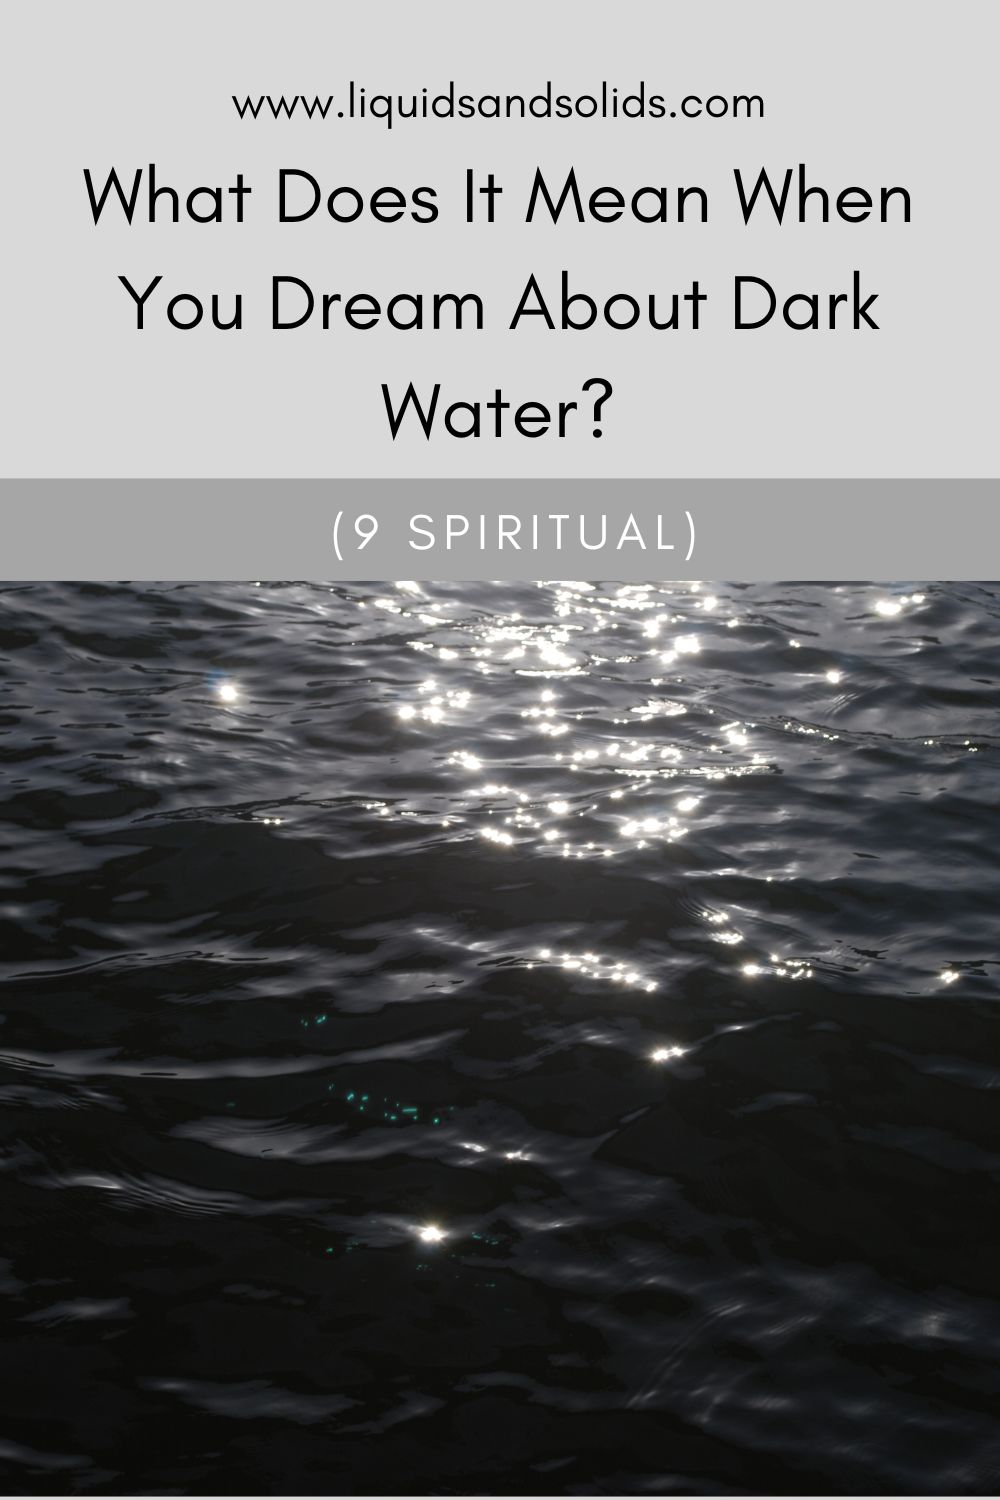 What Is A Murky Water Dream?